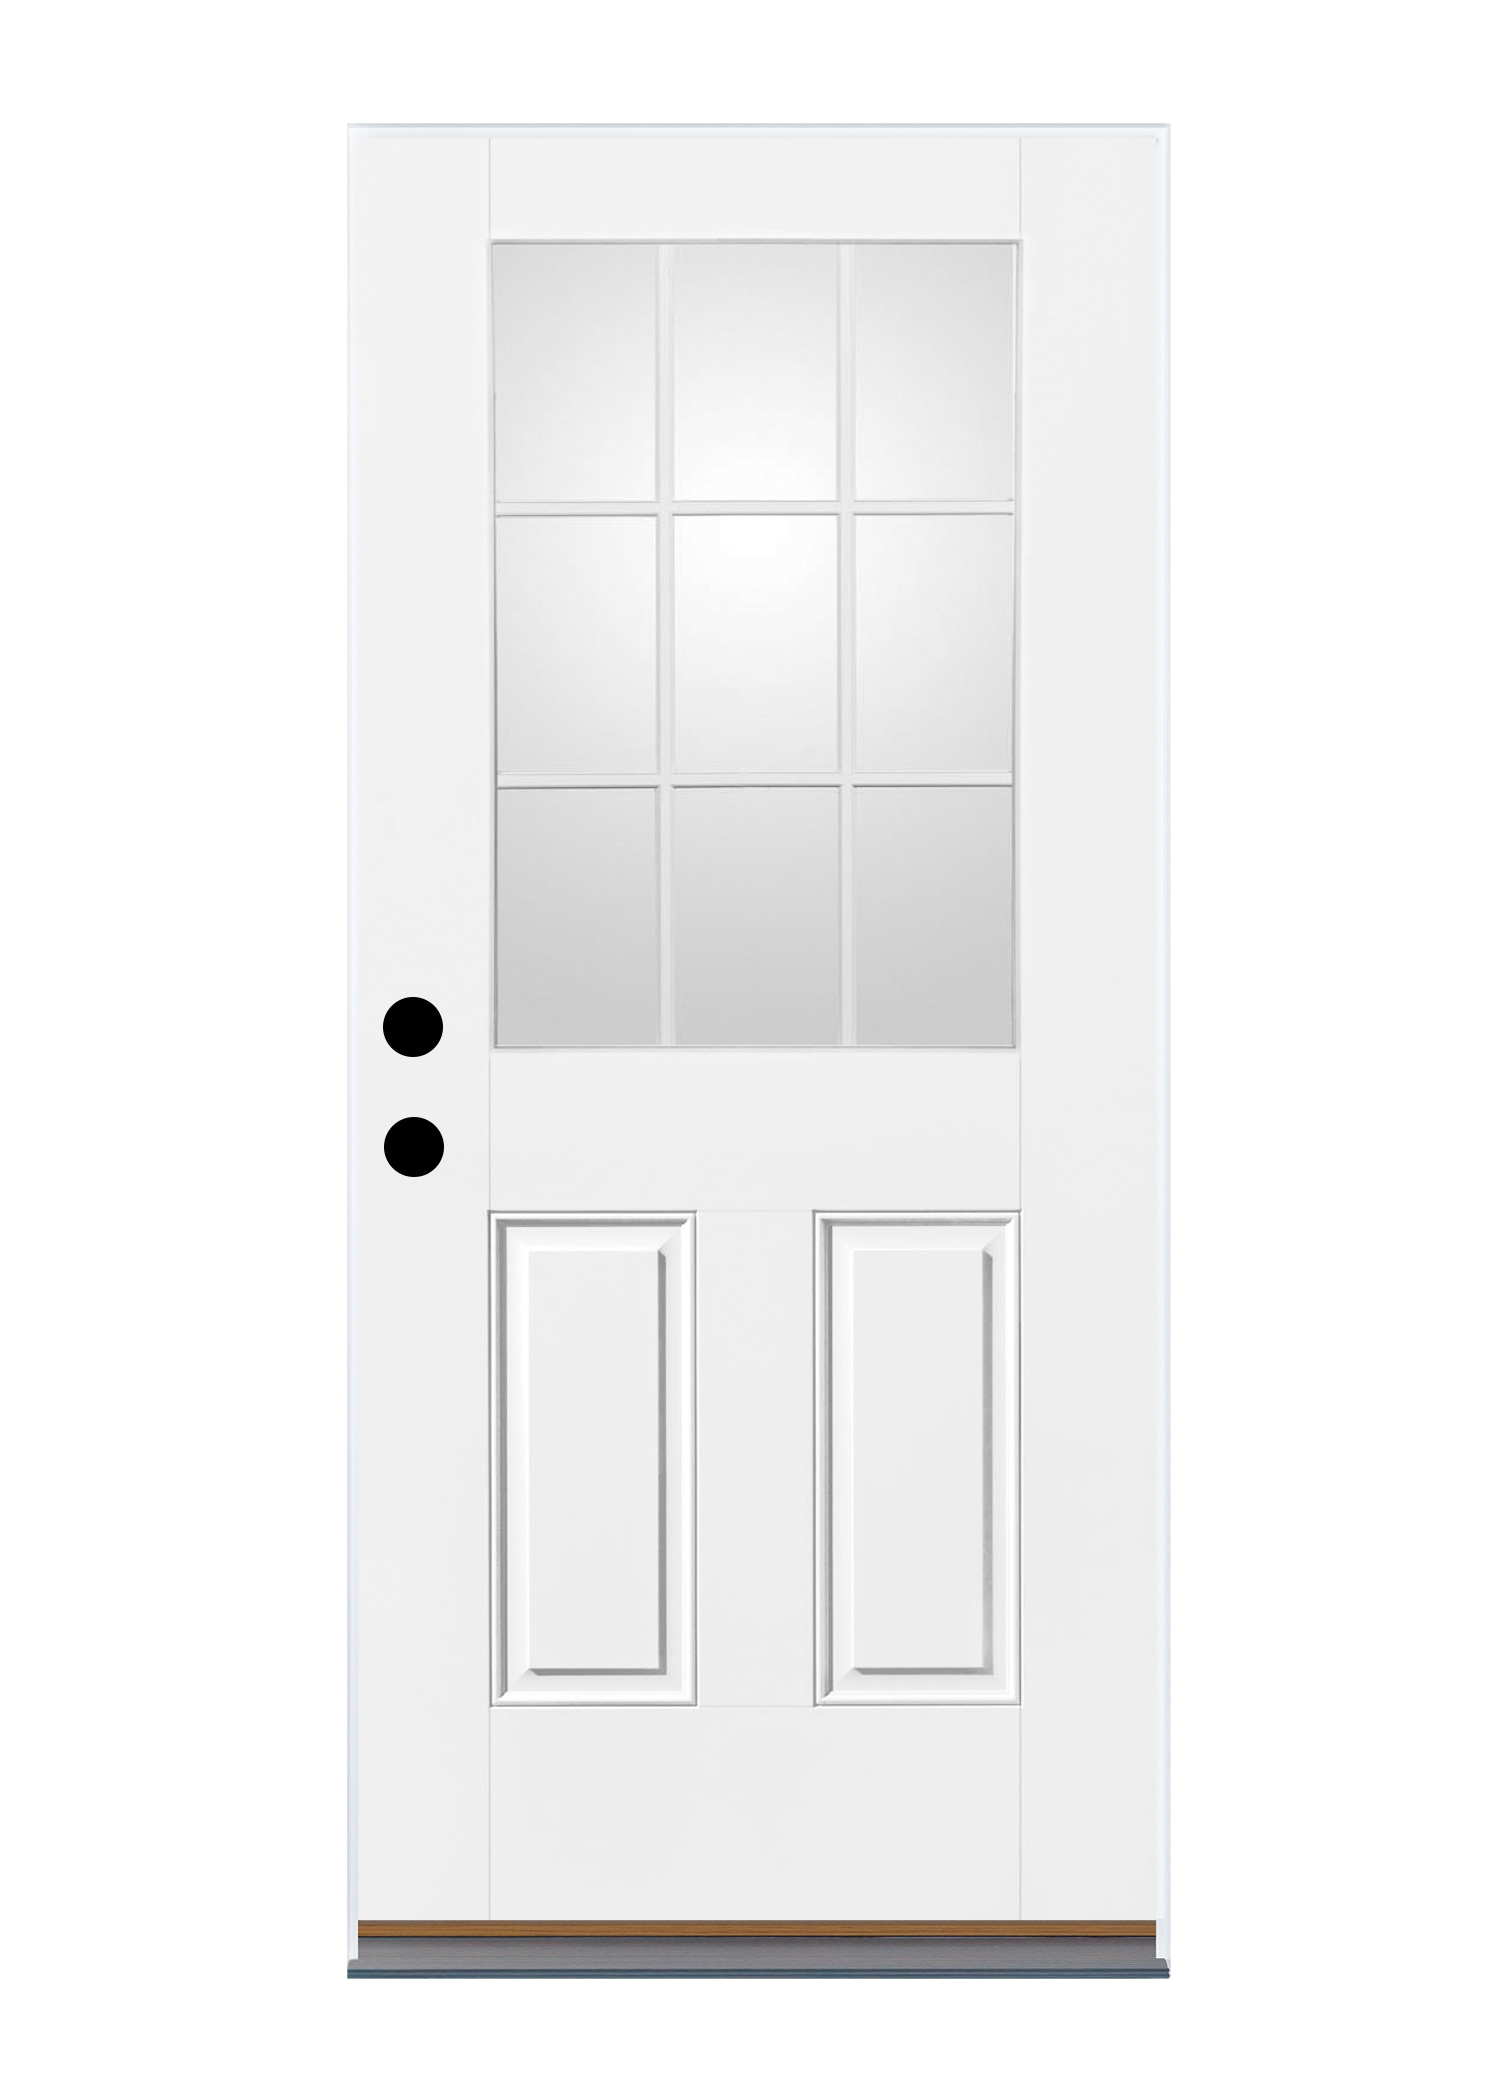 Therma-Tru Benchmark Doors 36-in x 80-in Fiberglass Half Lite Left-Hand Outswing Ready To Paint Prehung Single Front Door Insulating Core in White -  SSCD4E30LNOS